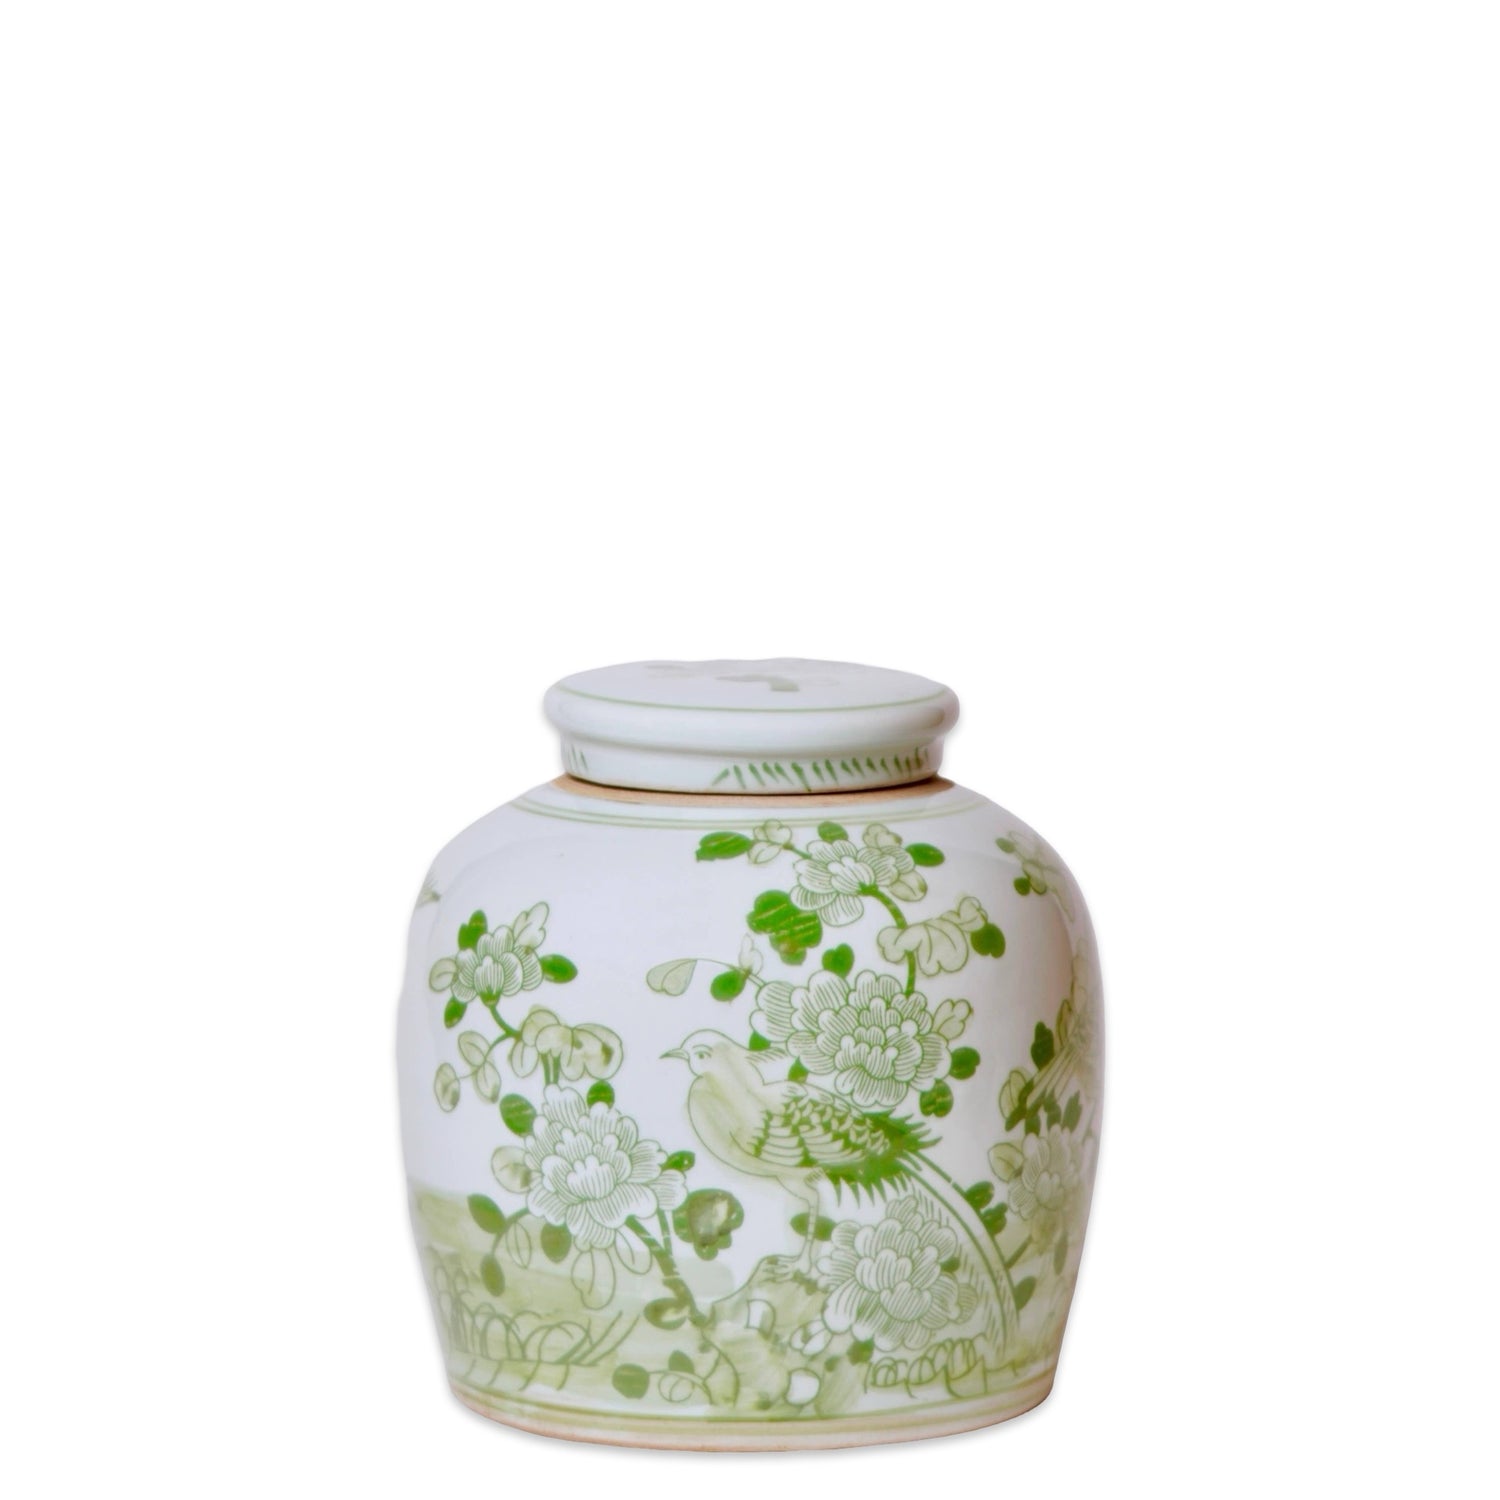 Bird and Flower Green and White Porcelain Jar